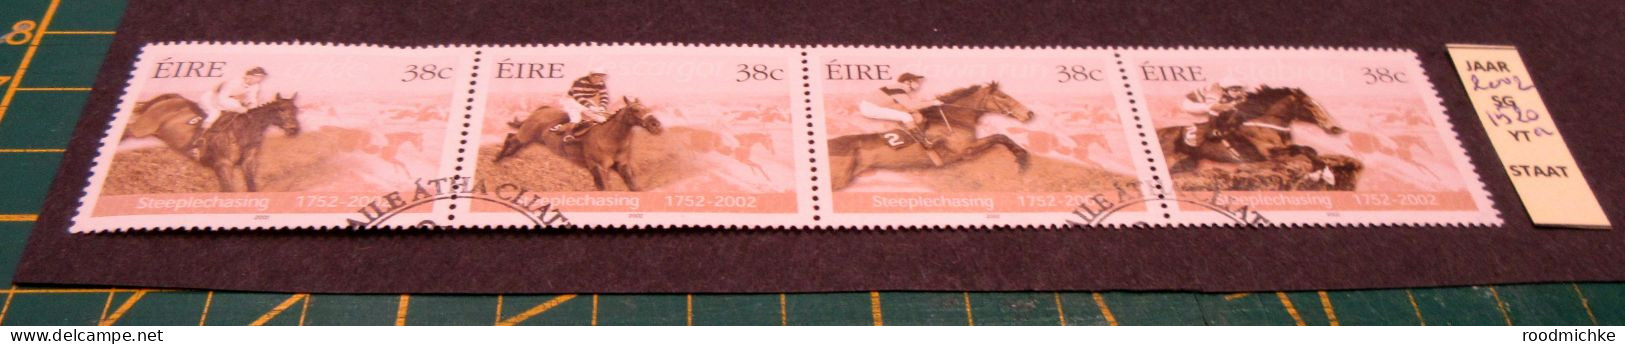 IERLAND STEEPLECHASING SG1520a USED - Used Stamps